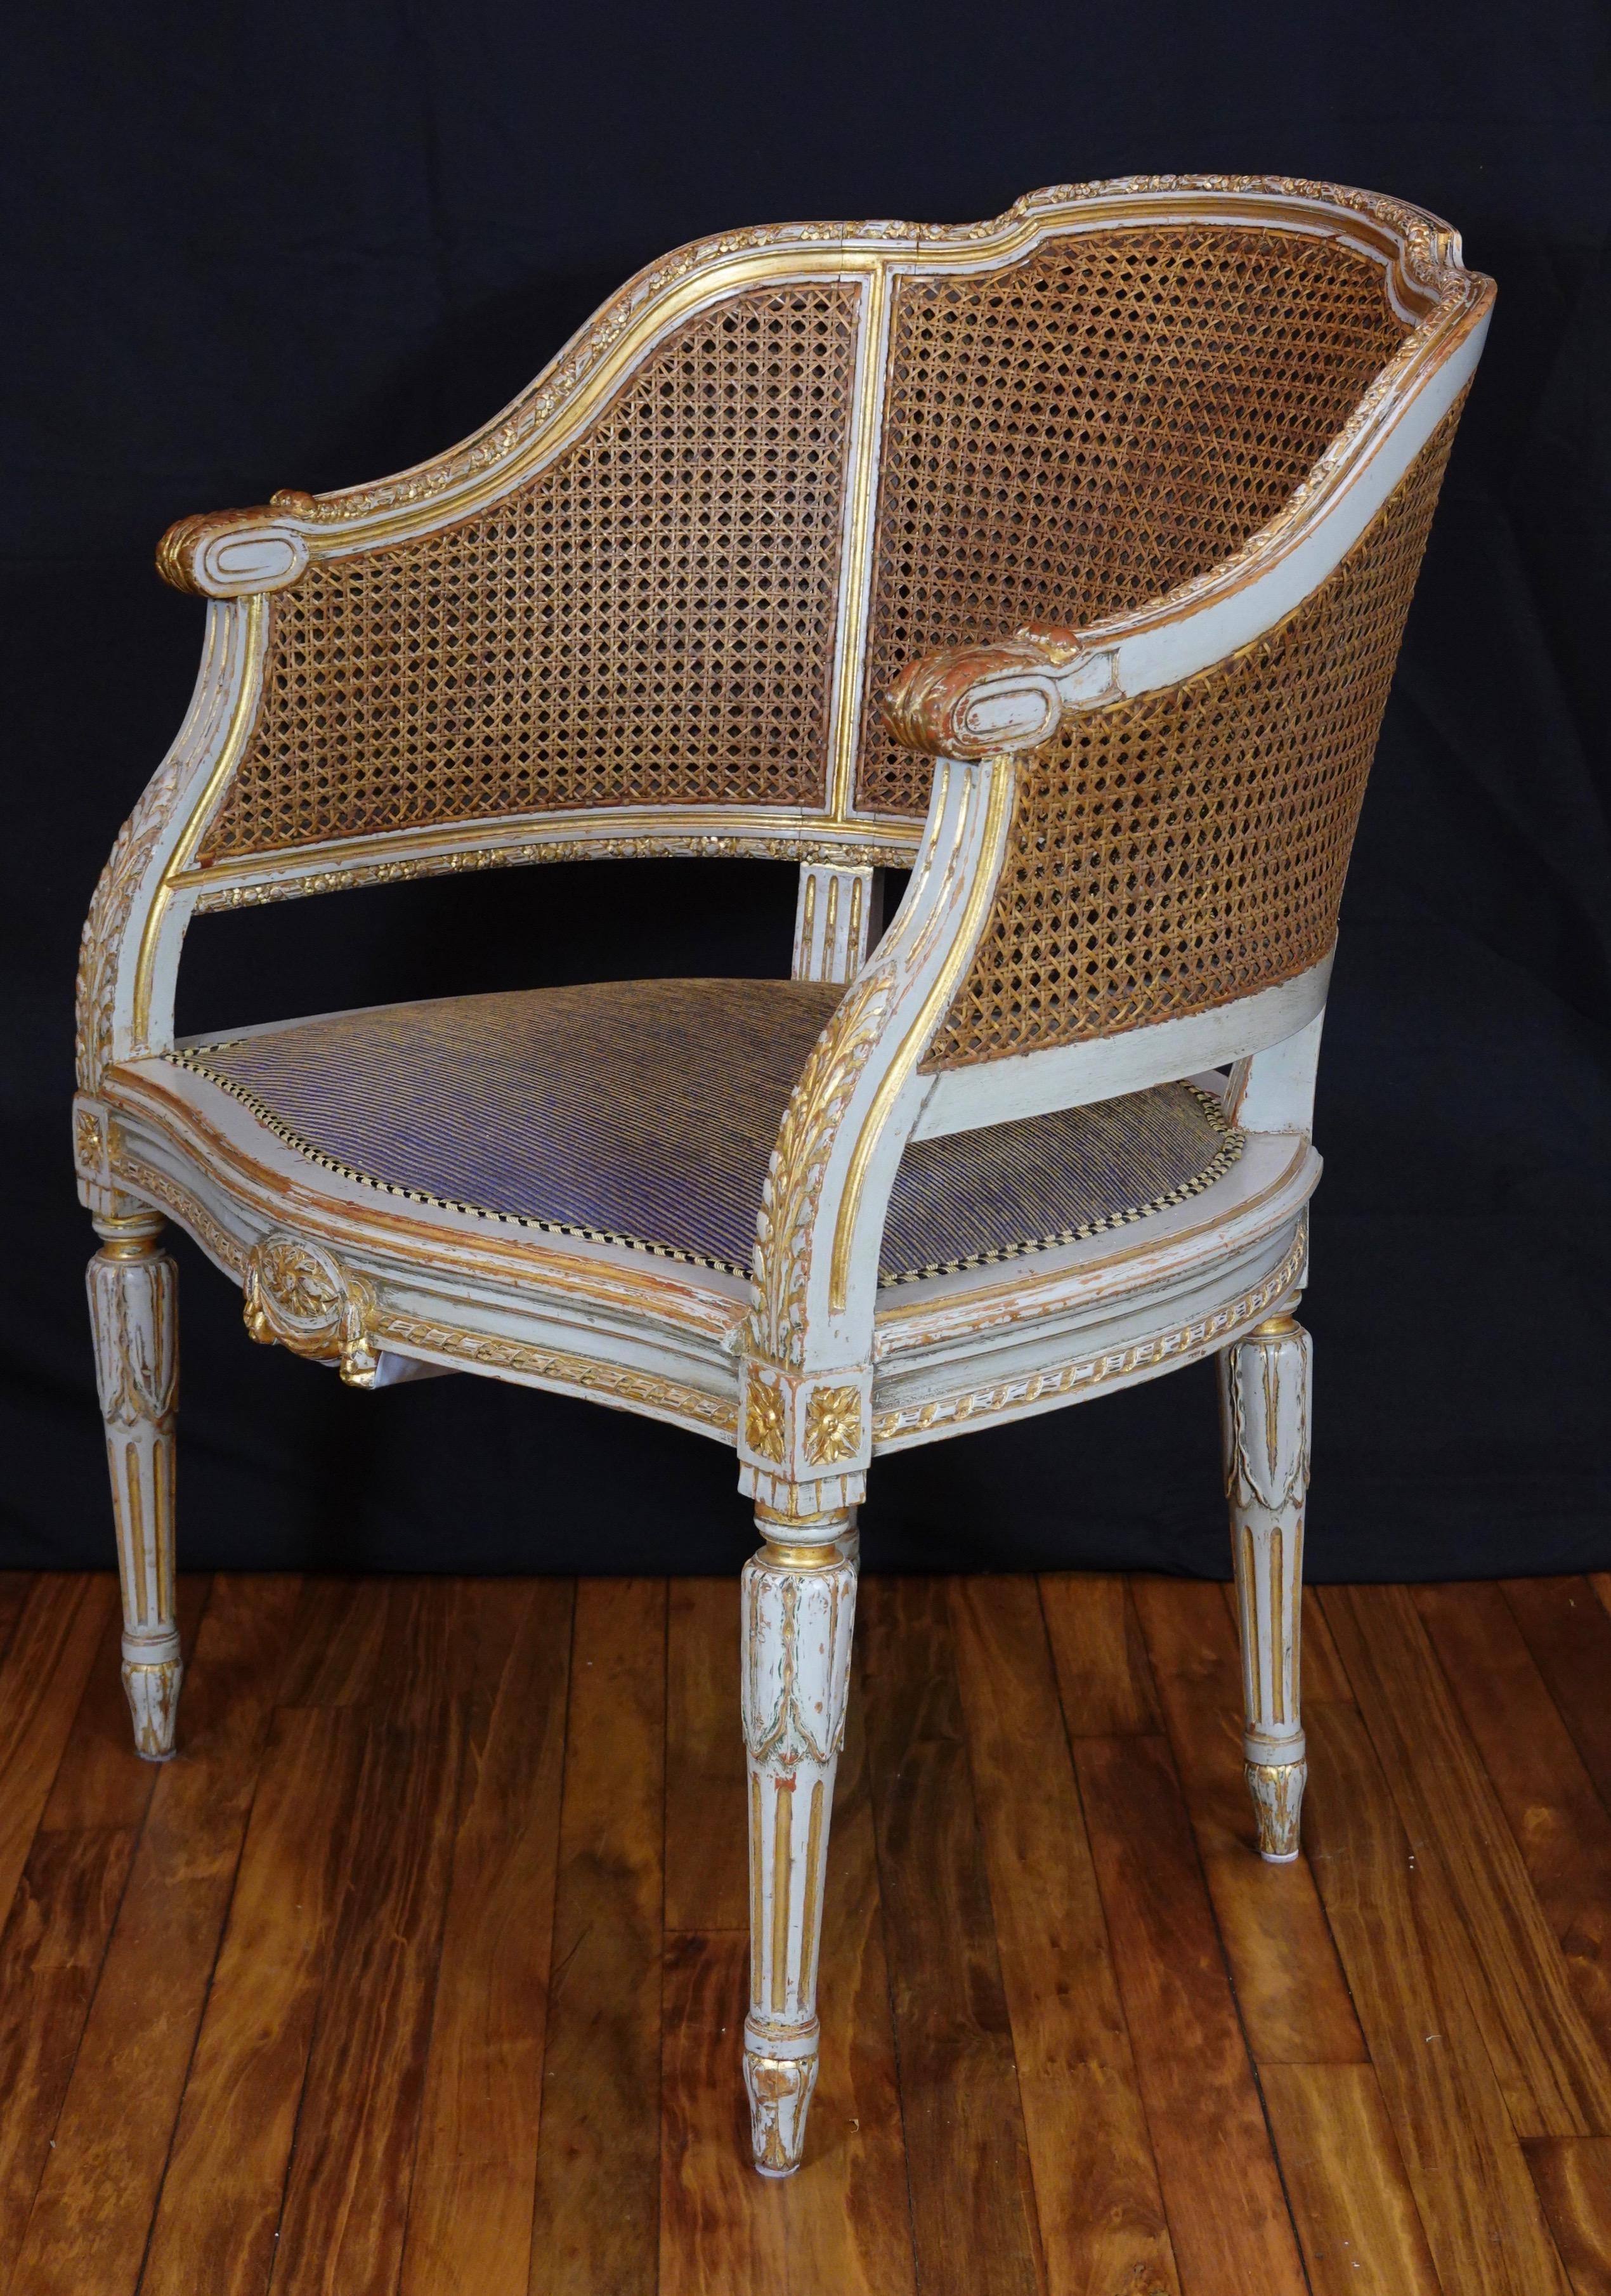 French Louis XVI Style Desk Chair with Caned Back and Upholstered Seat 4